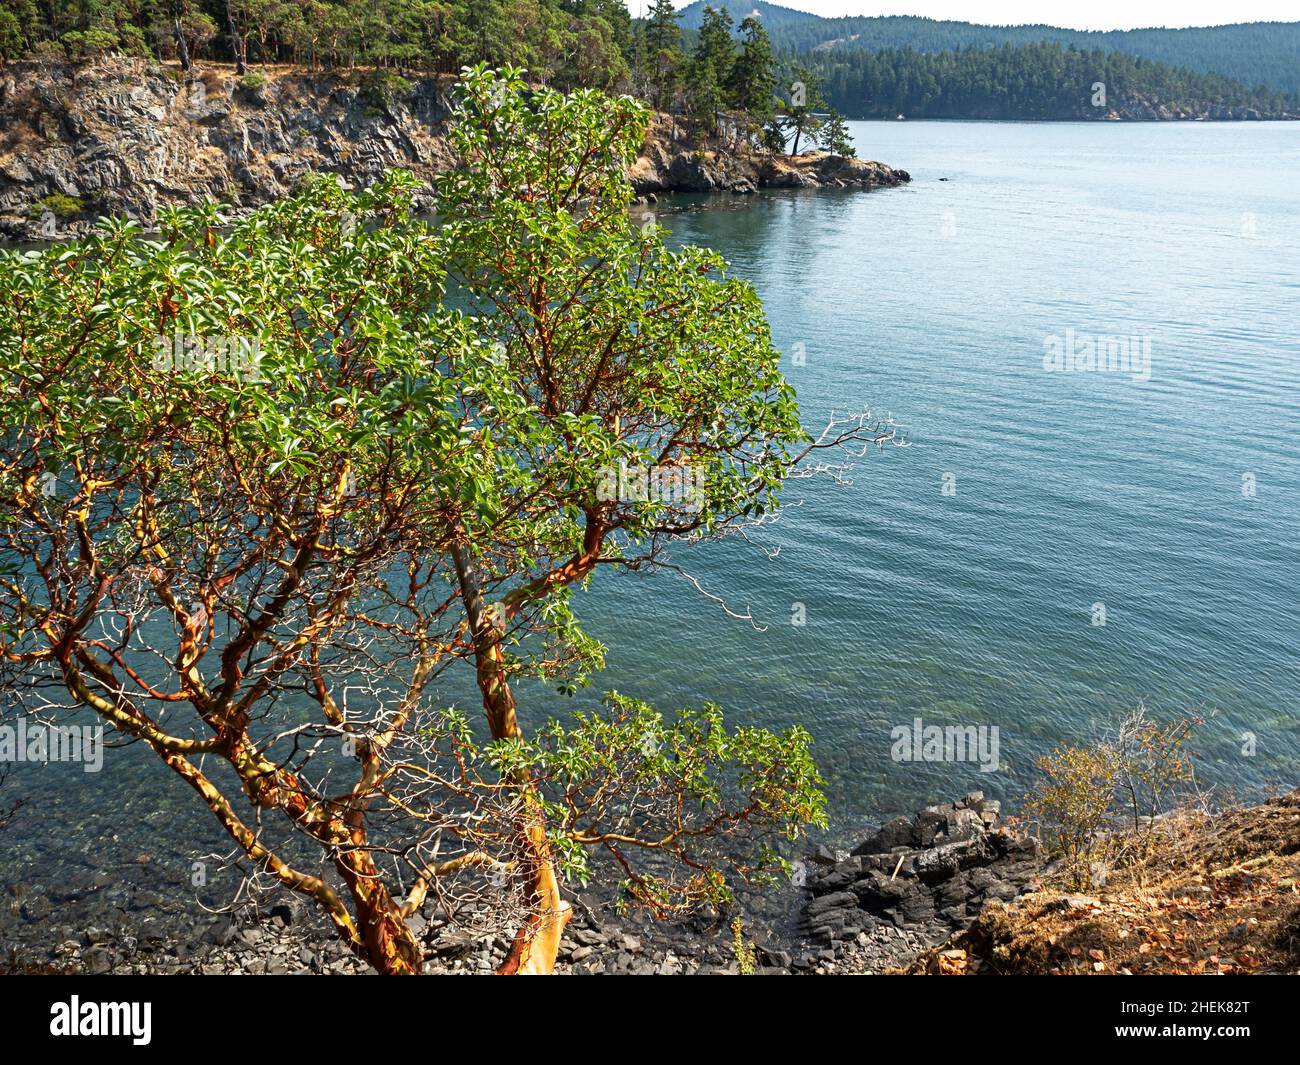 WA21047-00...WASHINGTON - Pacific Madrone tree growing on a headland at the confluence of Obstruction Pass and Buck Bay at Obstruction Pass Park. Stock Photo